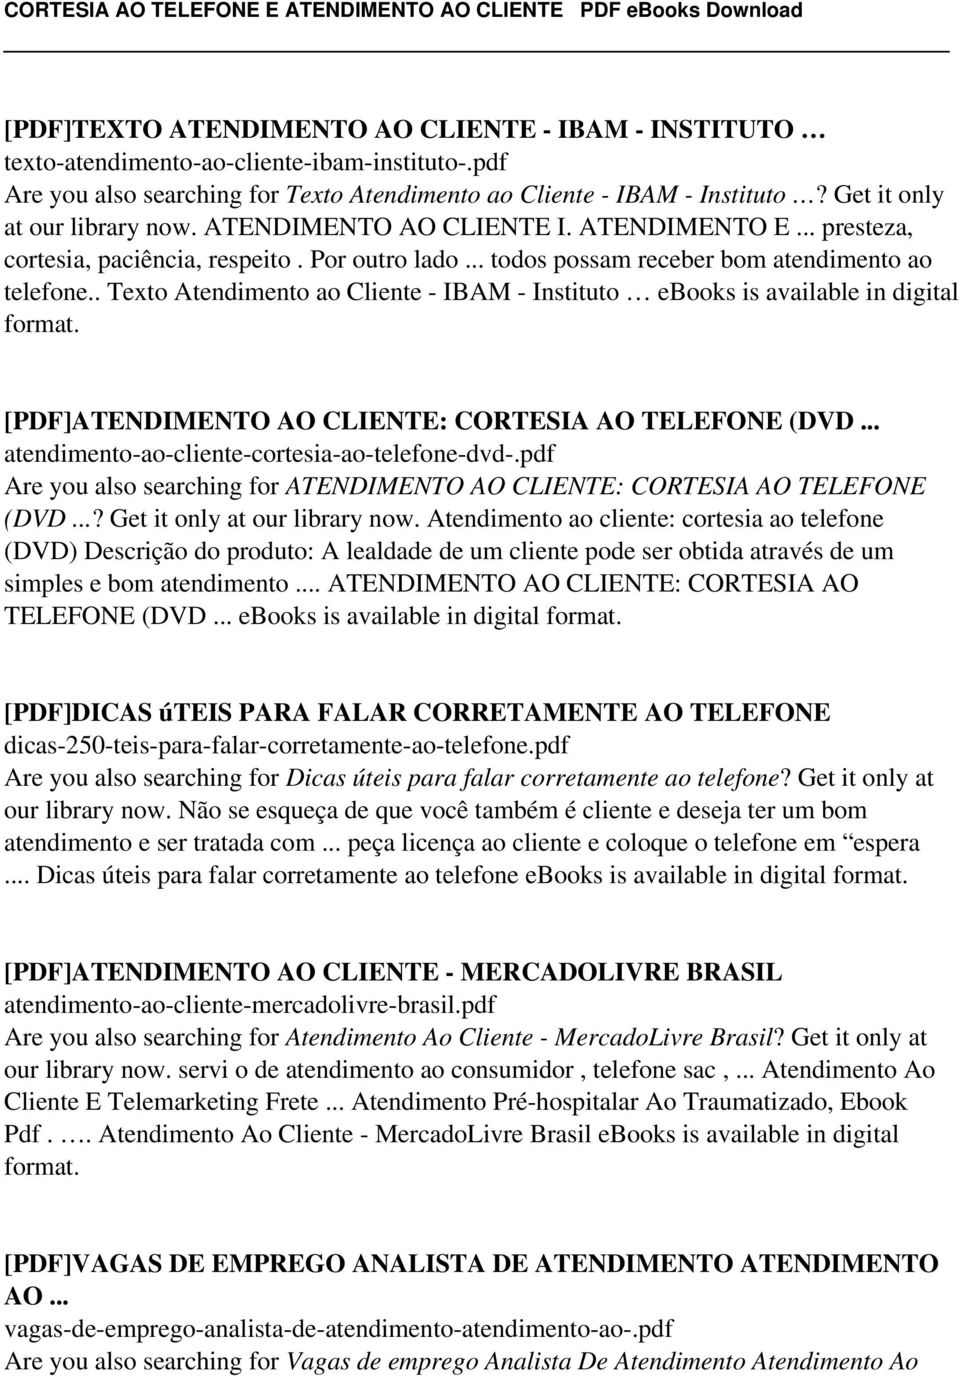 . Texto Atendimento ao Cliente - IBAM - Instituto ebooks is available in digital format. [PDF]ATENDIMENTO AO CLIENTE: CORTESIA AO TELEFONE (DVD... atendimento-ao-cliente-cortesia-ao-telefone-dvd-.